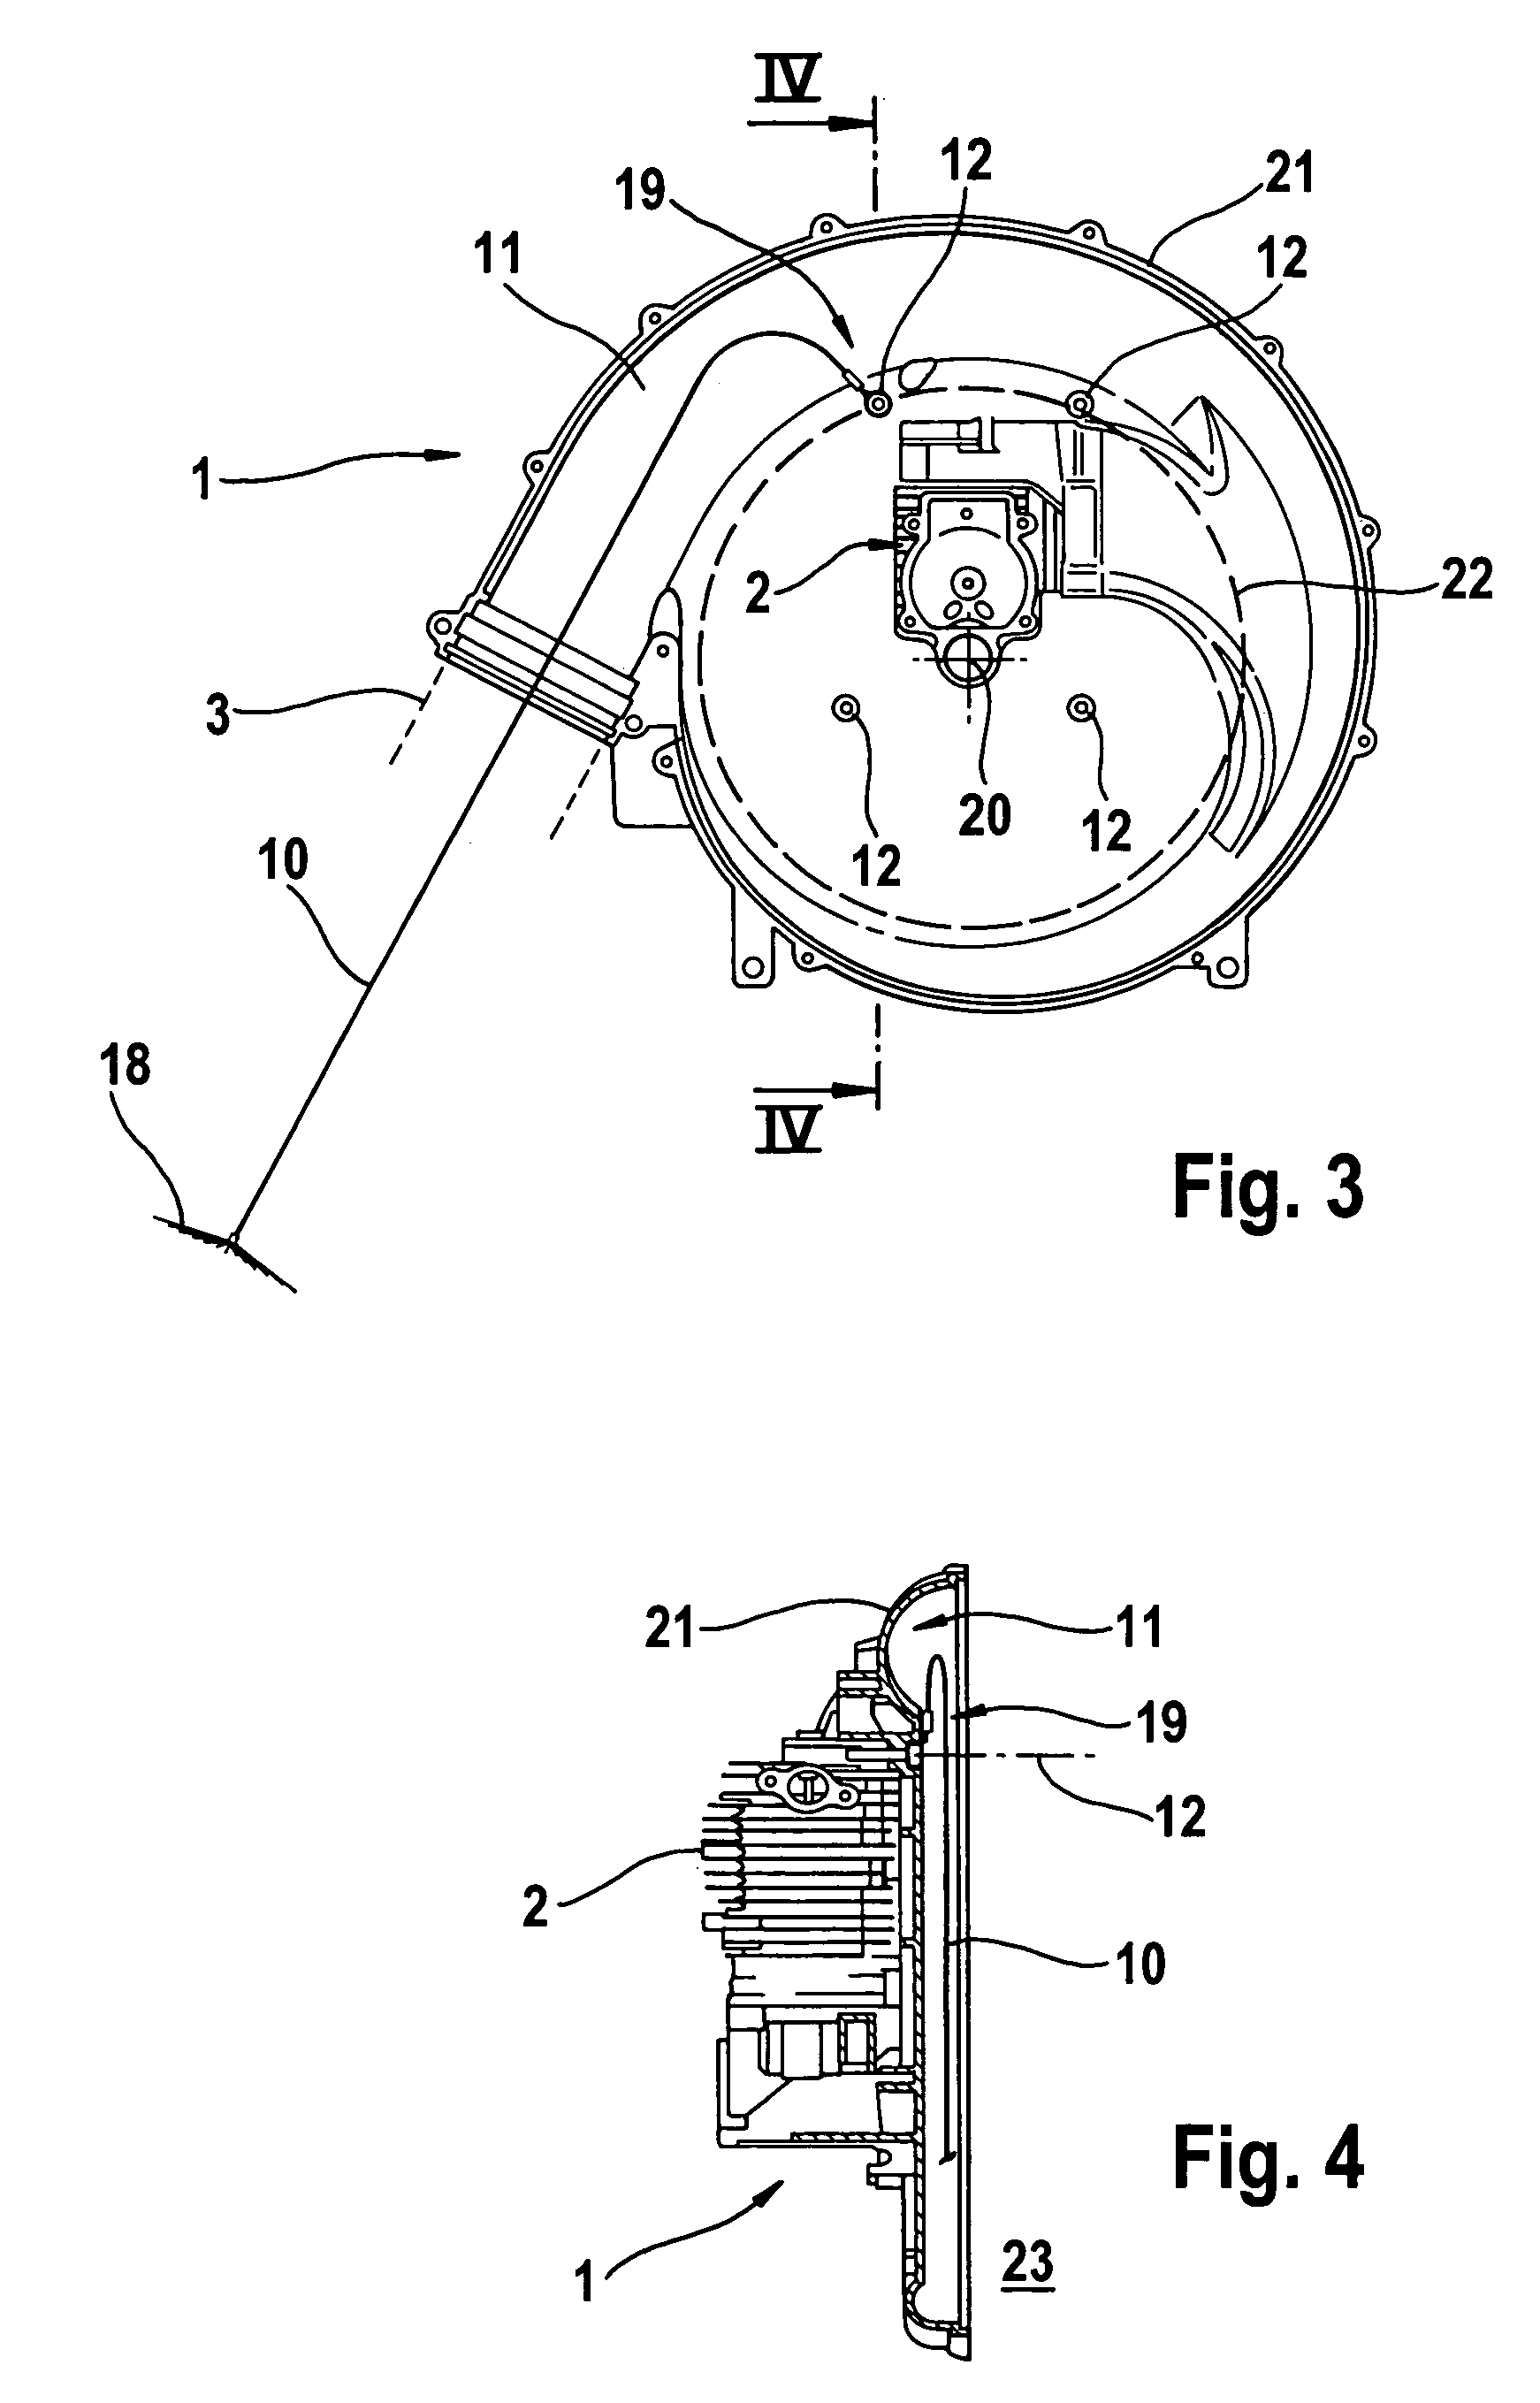 Suction device/blower